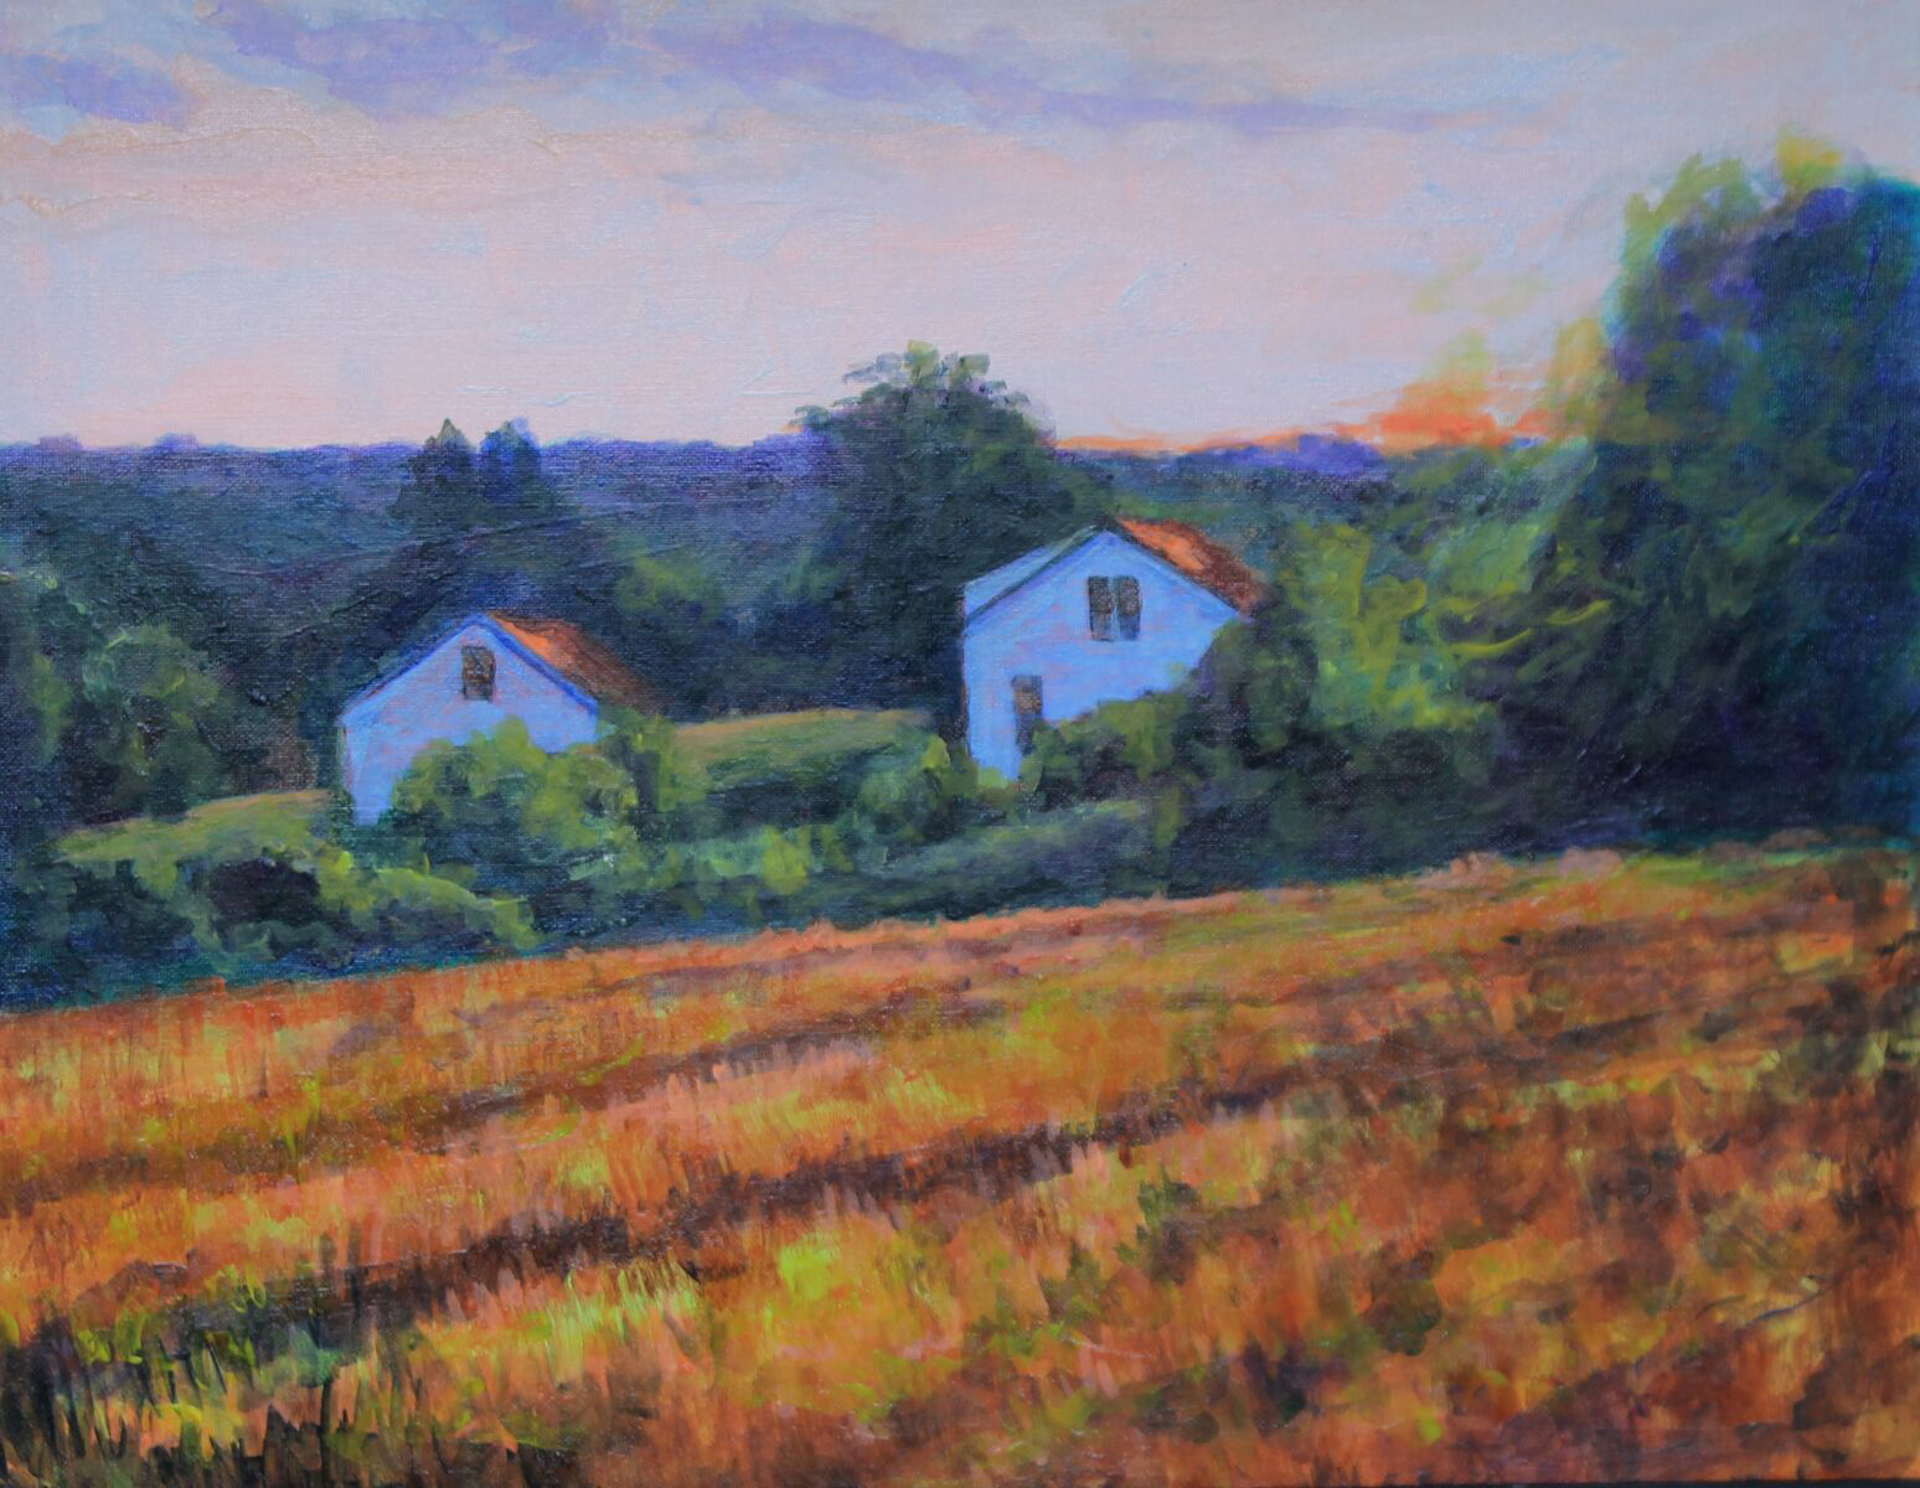 Late Summer on the Hill by Douglas H. Caves Sr.